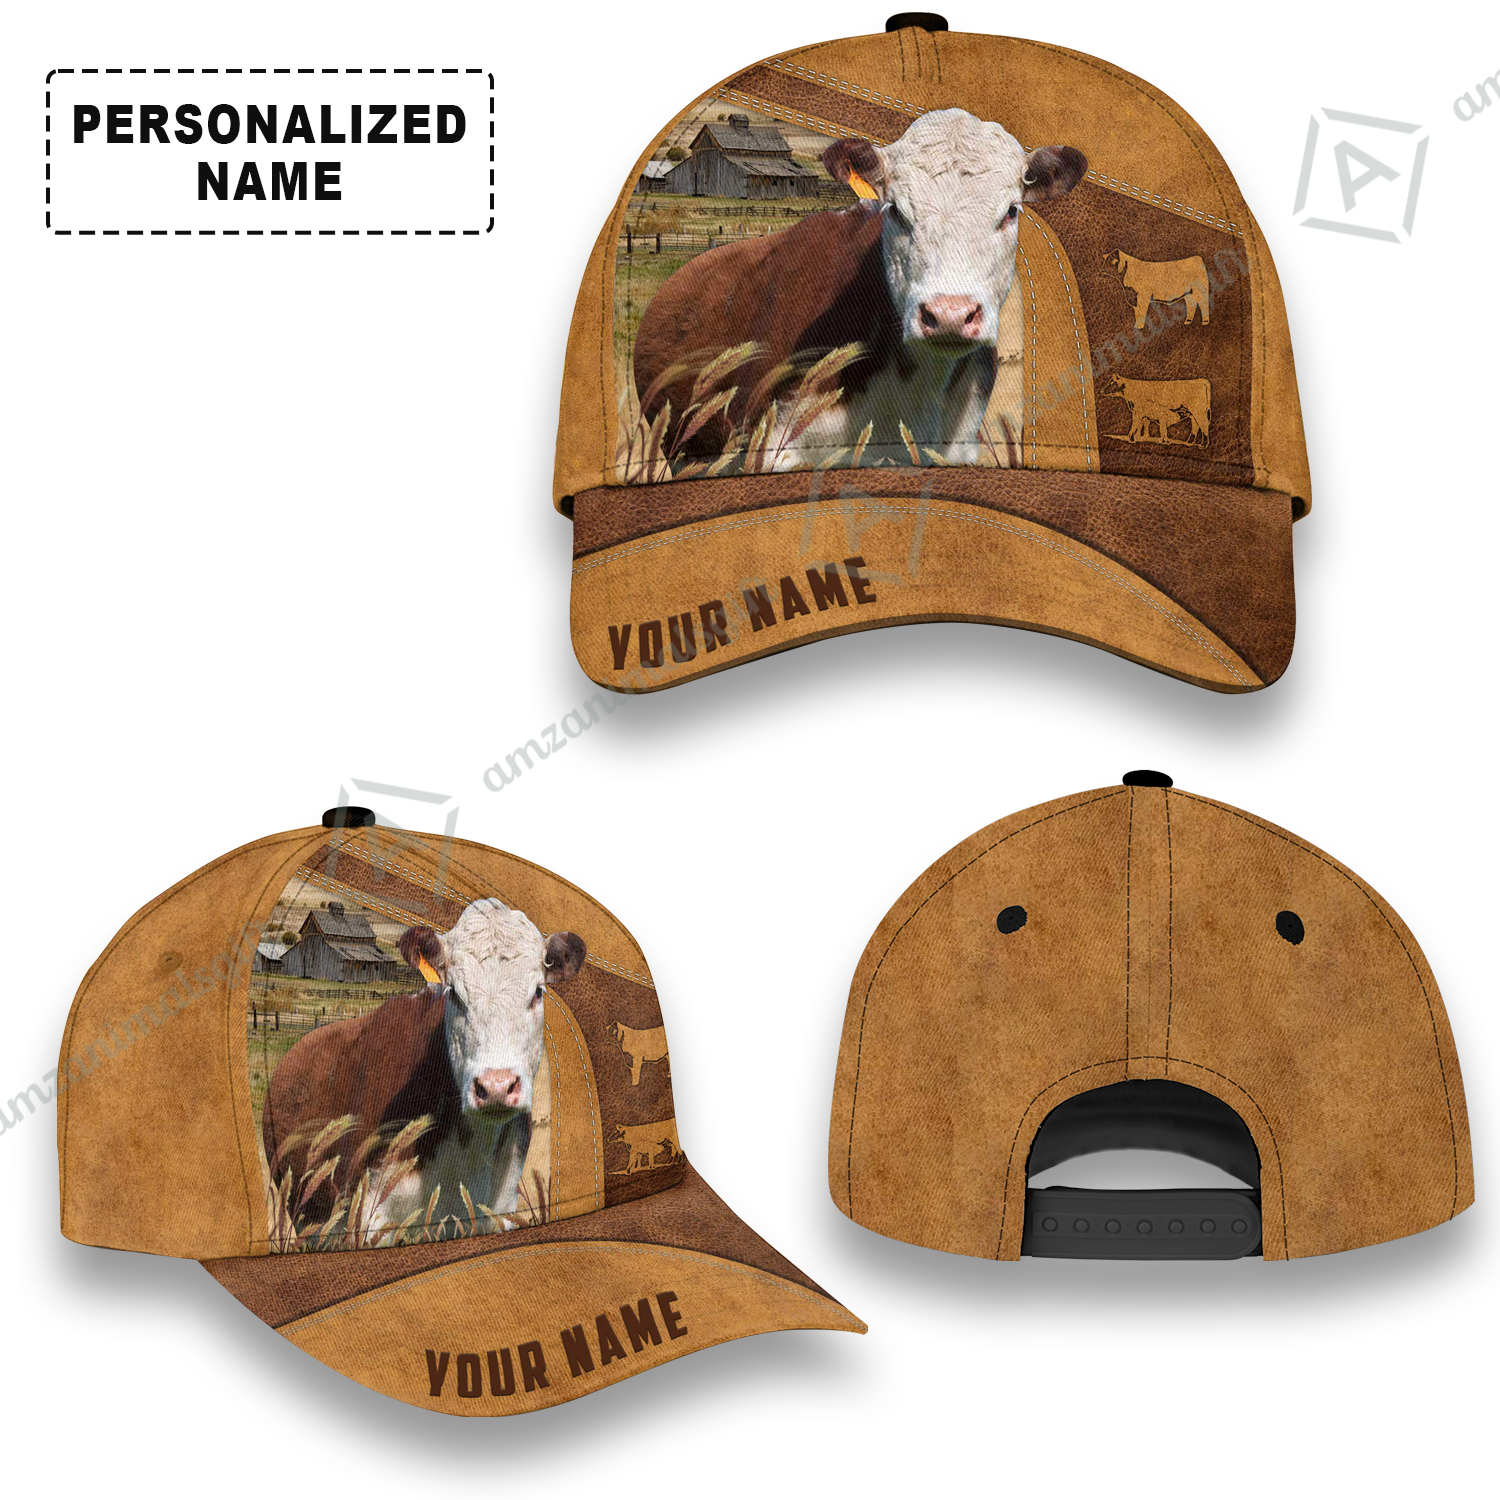 Personalized Name Hereford Cap, Cattle Farm Brown Leather Pattern Custom Hats For Friend, Family, Farmers, Hereford Lovers